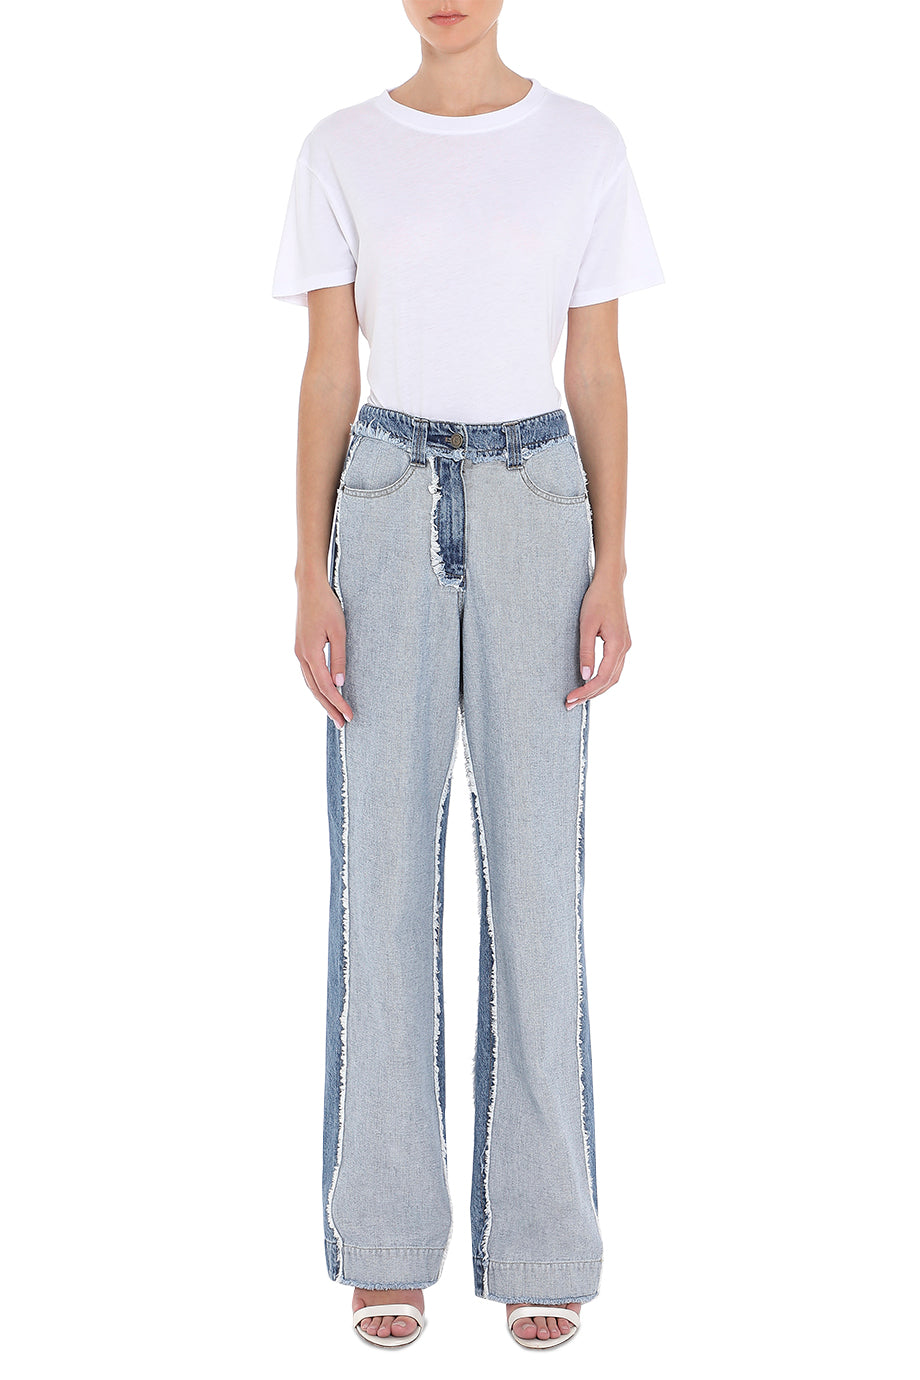 Cora Trousers